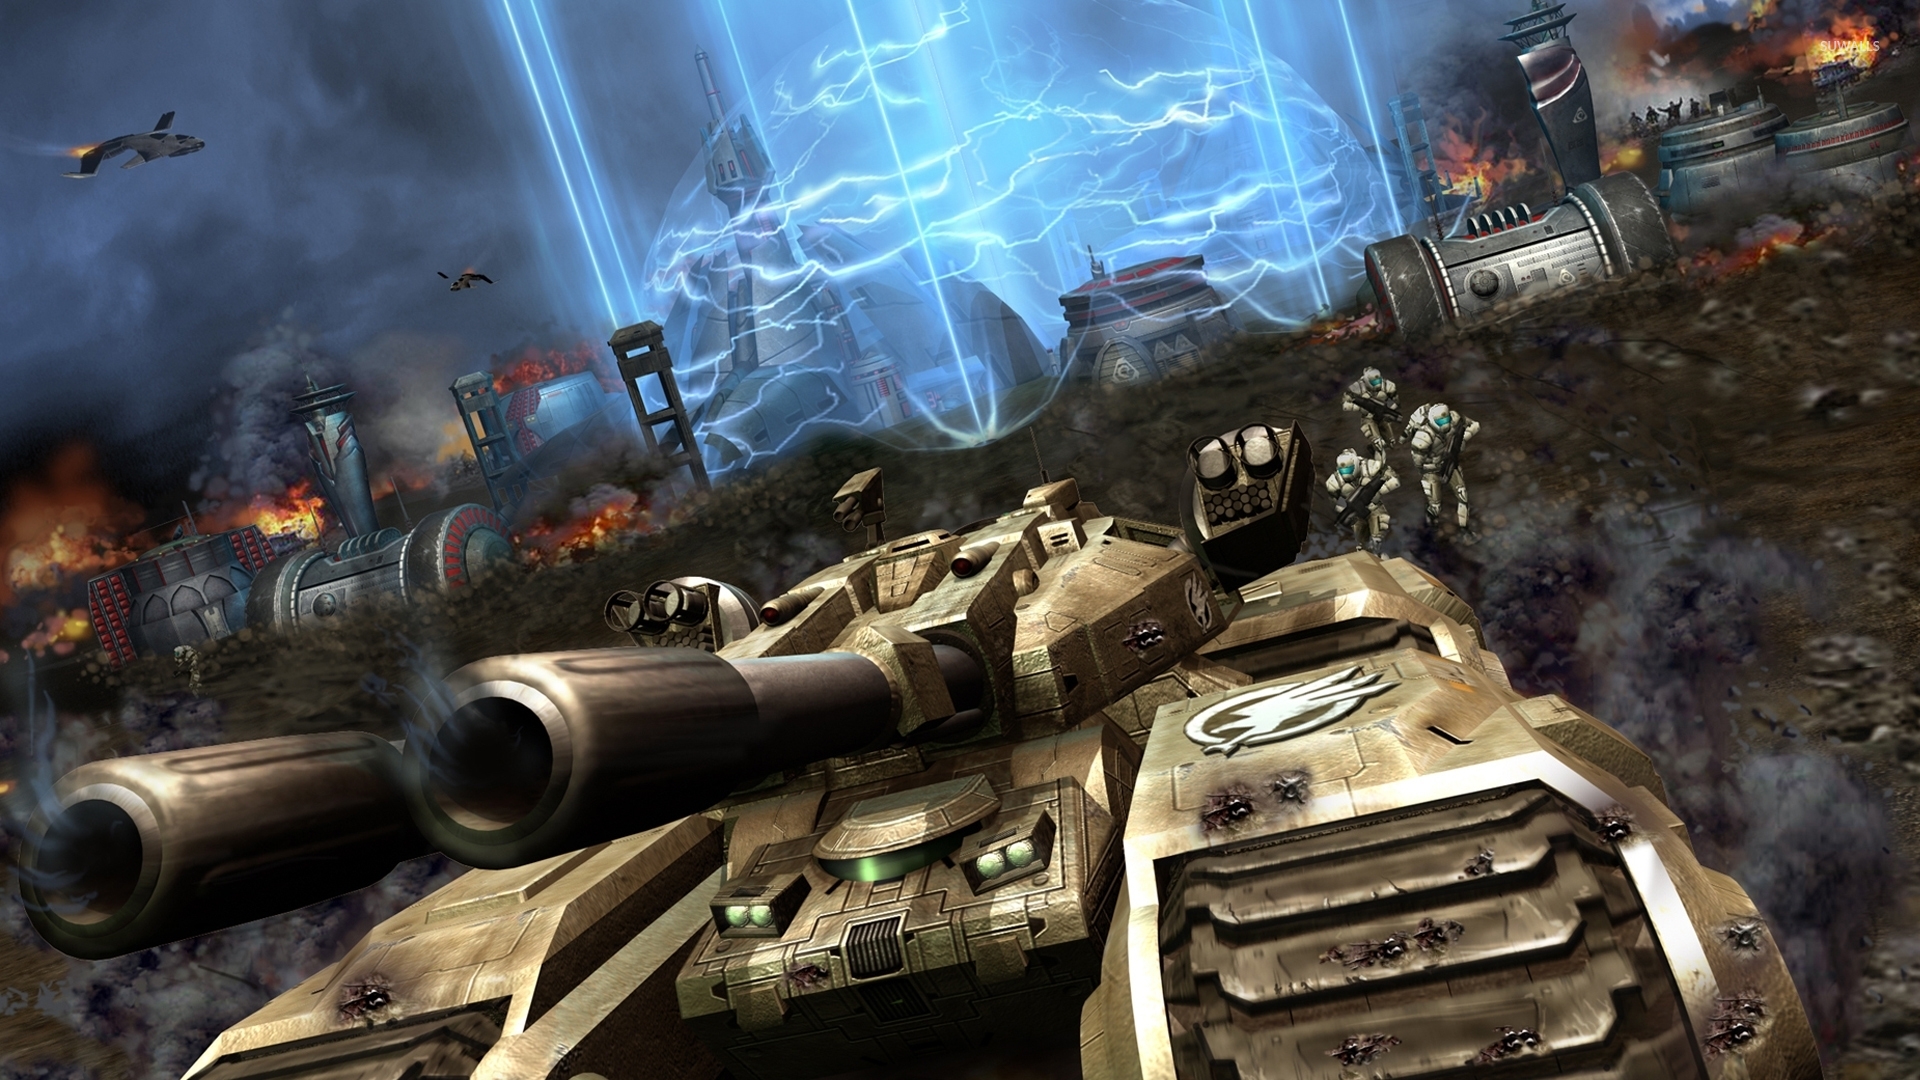 Command & Conquer Background. Command